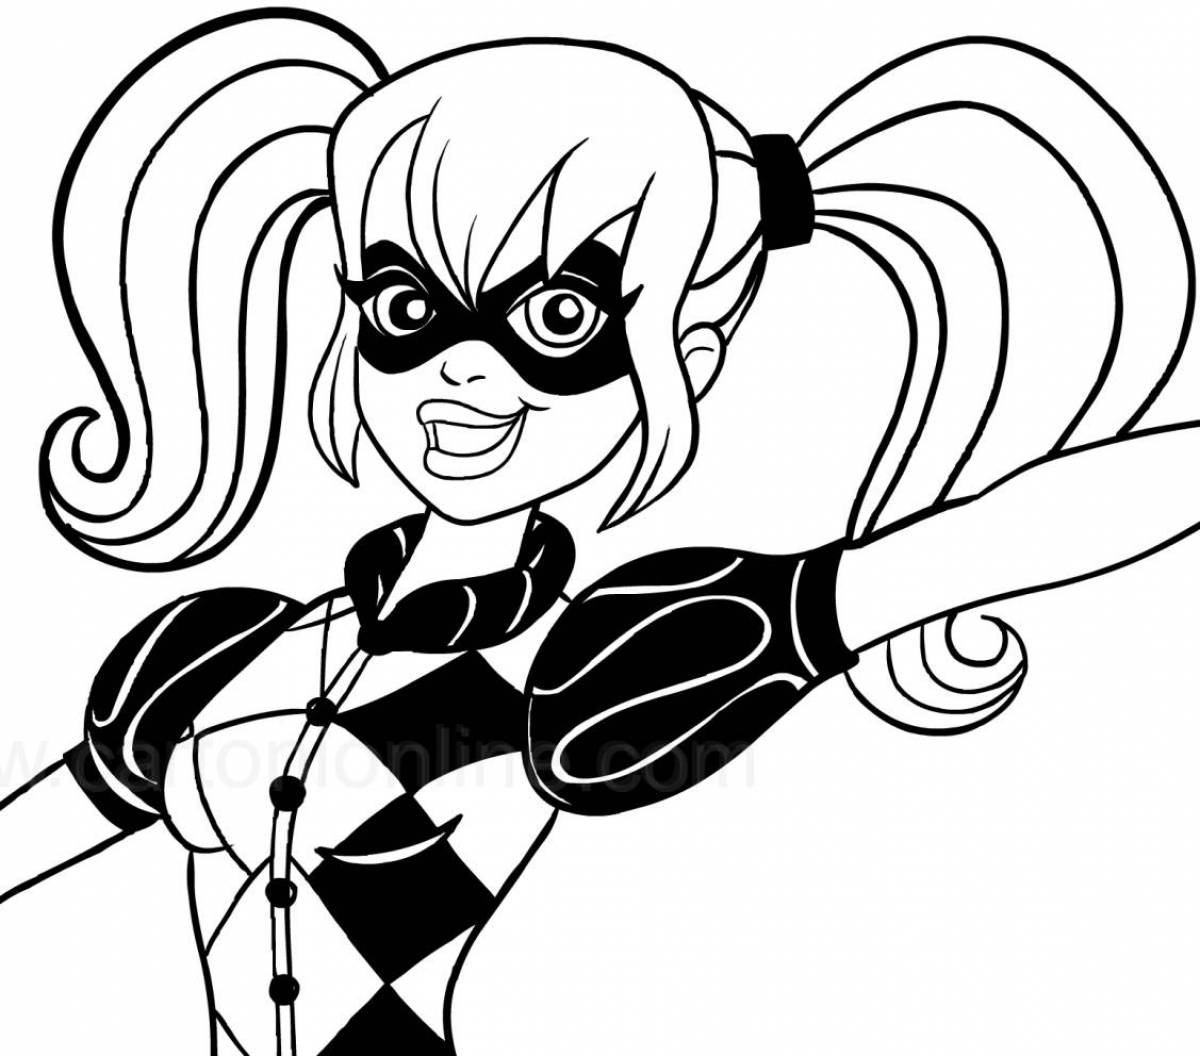 Harley quinn animated coloring book